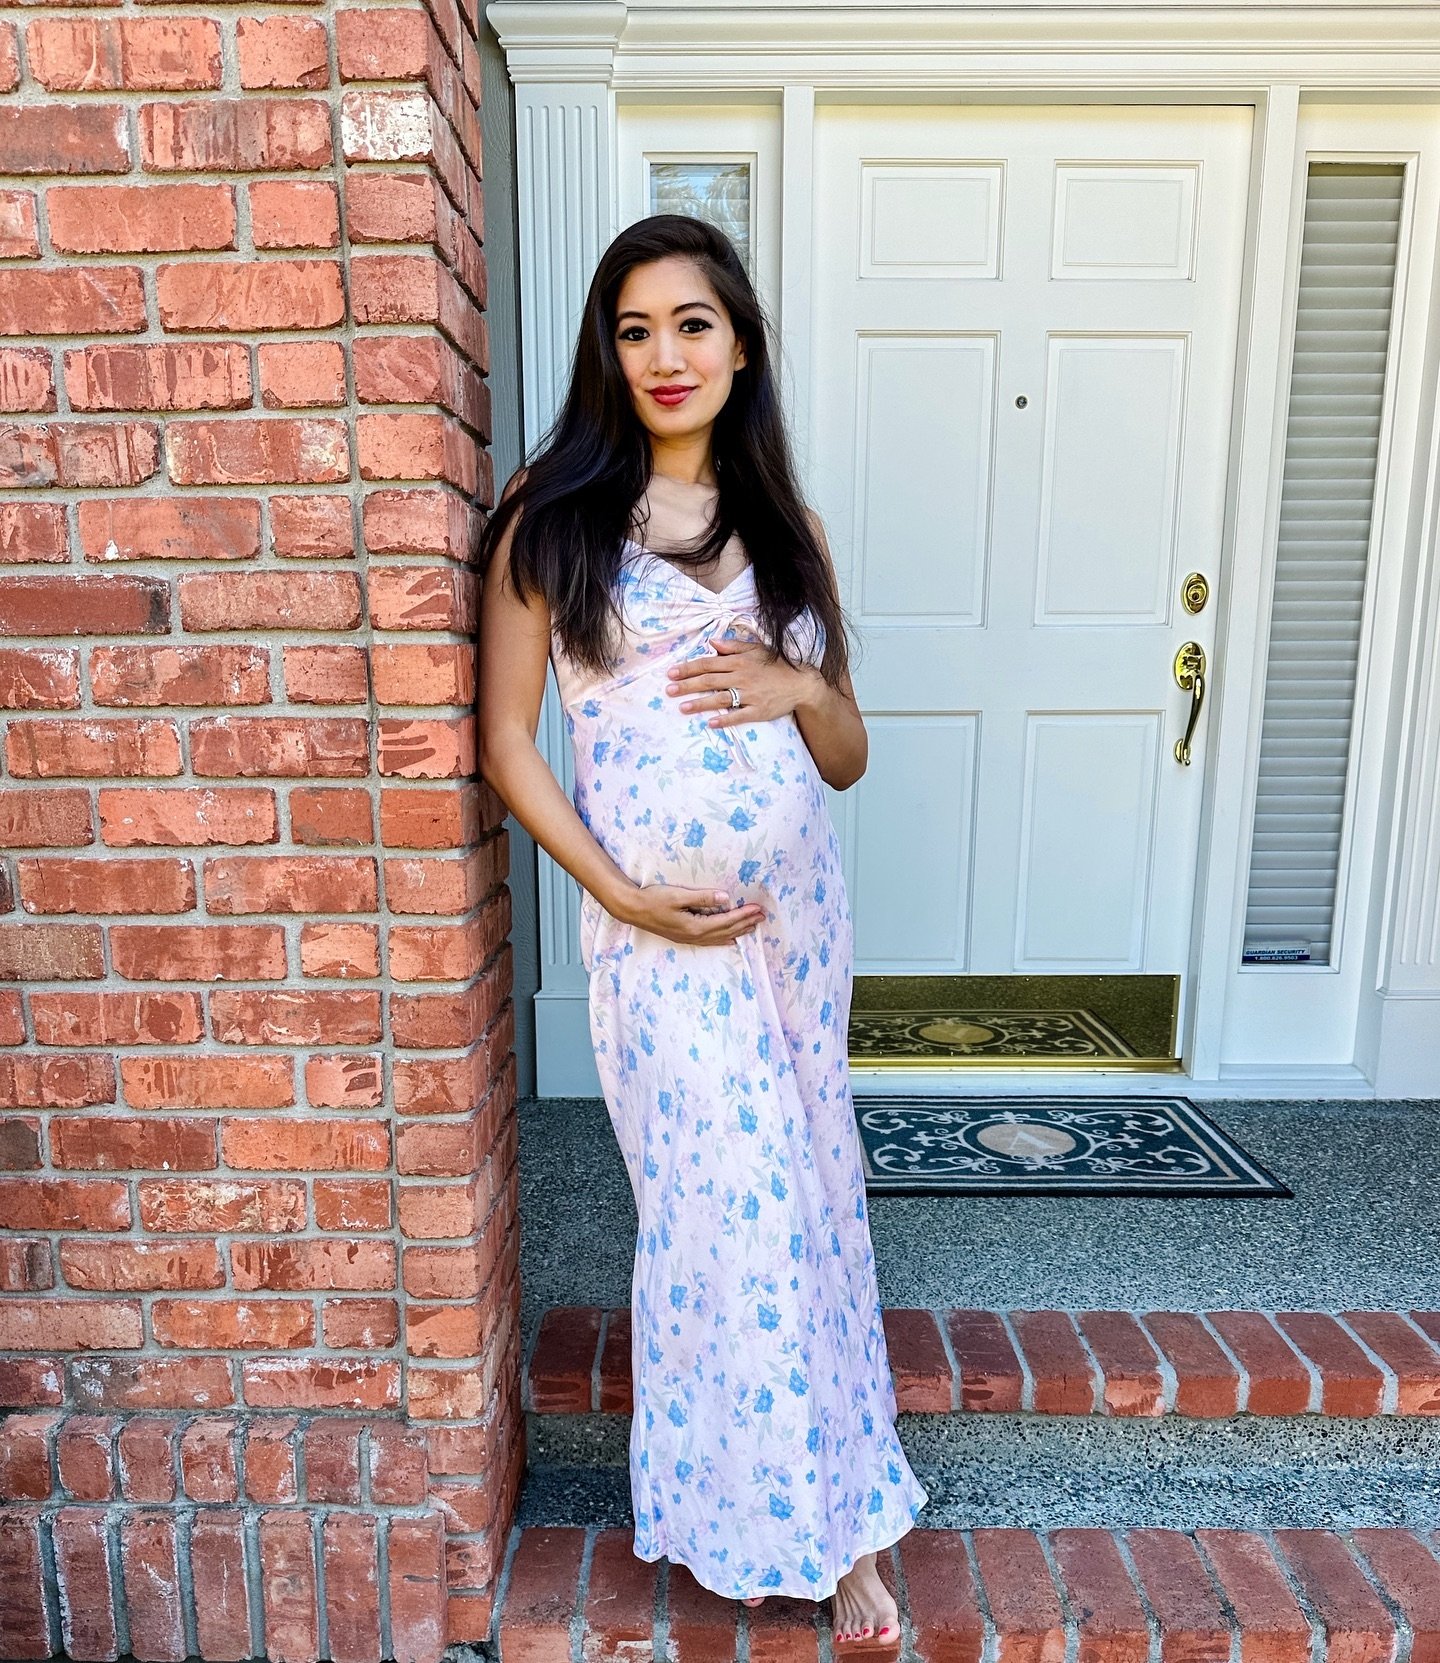 Nesting mode 🔛 Been getting allll the things ready for 👶 Saved all the nursery items I&rsquo;ve gotten in so far in my baby items highlight! My dress isn&rsquo;t maternity but sized up the bump! 🤰🏻Linked it via the @shop.ltk app! https://liketk.i